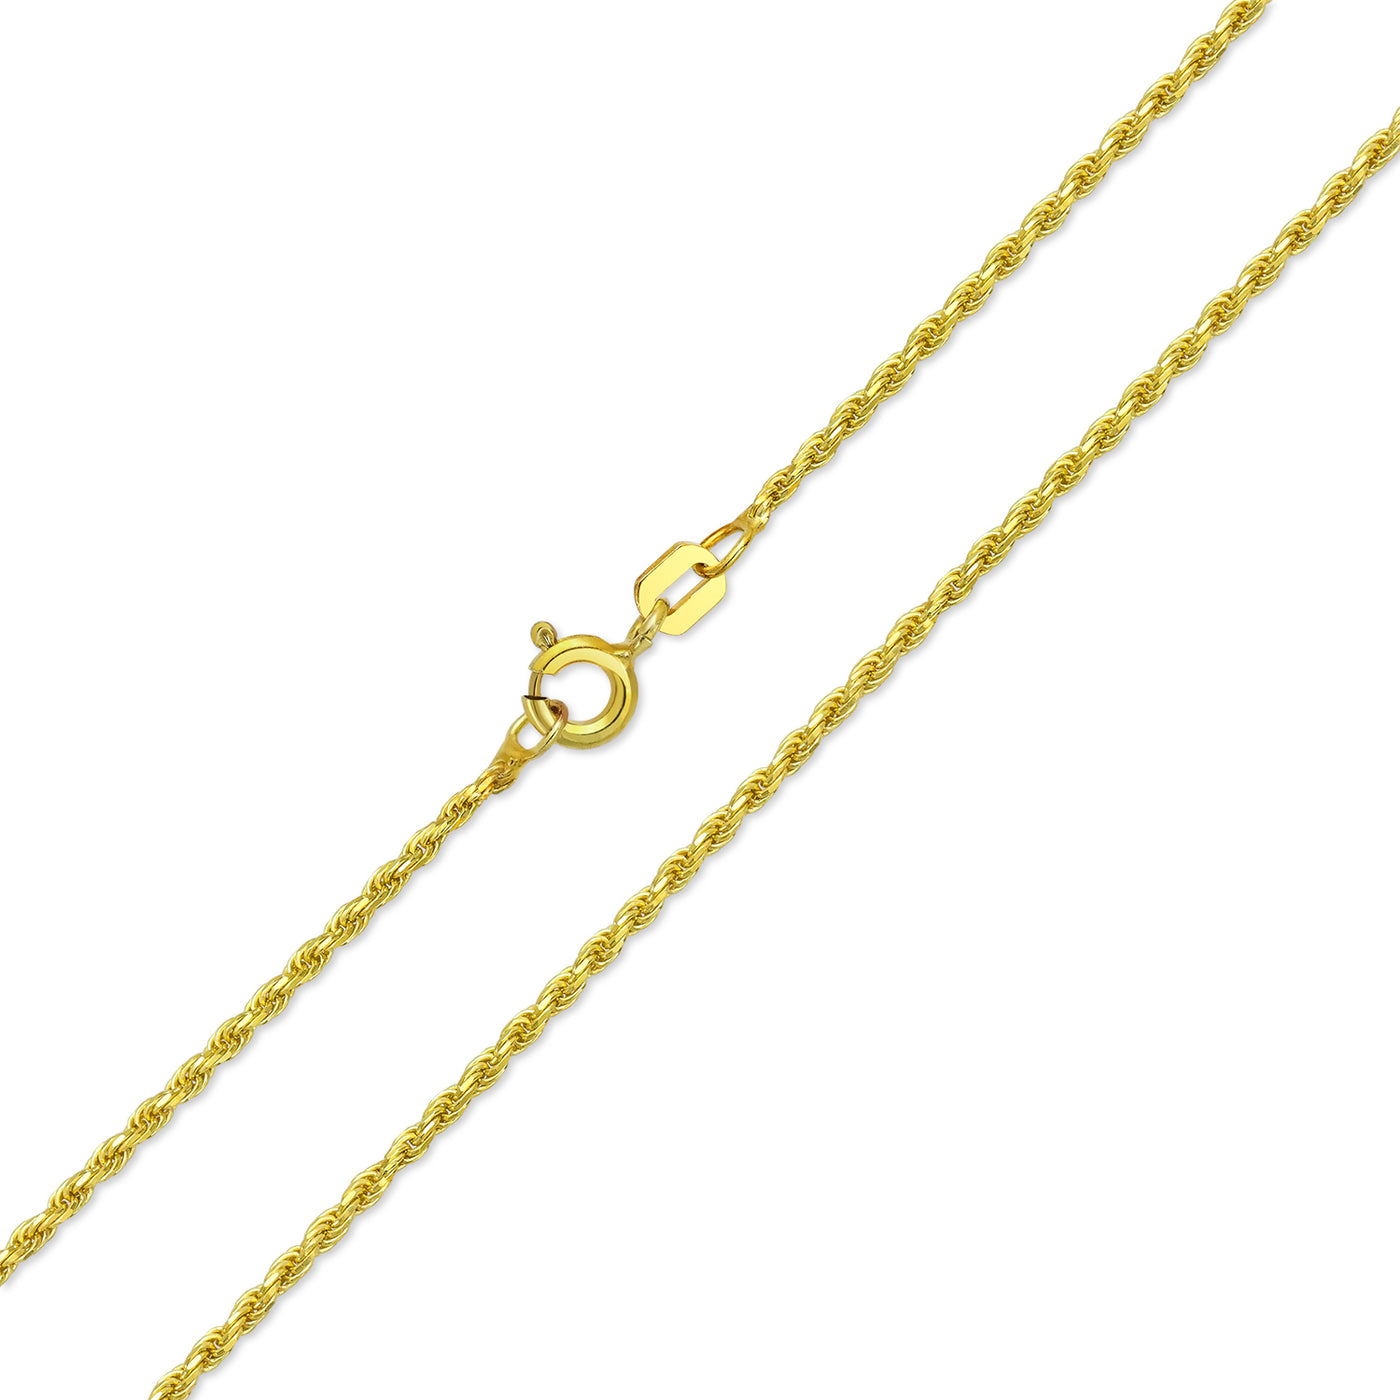 Rope Chain 30 Gauge Necklace Gold Plated .925 Sterling Silver